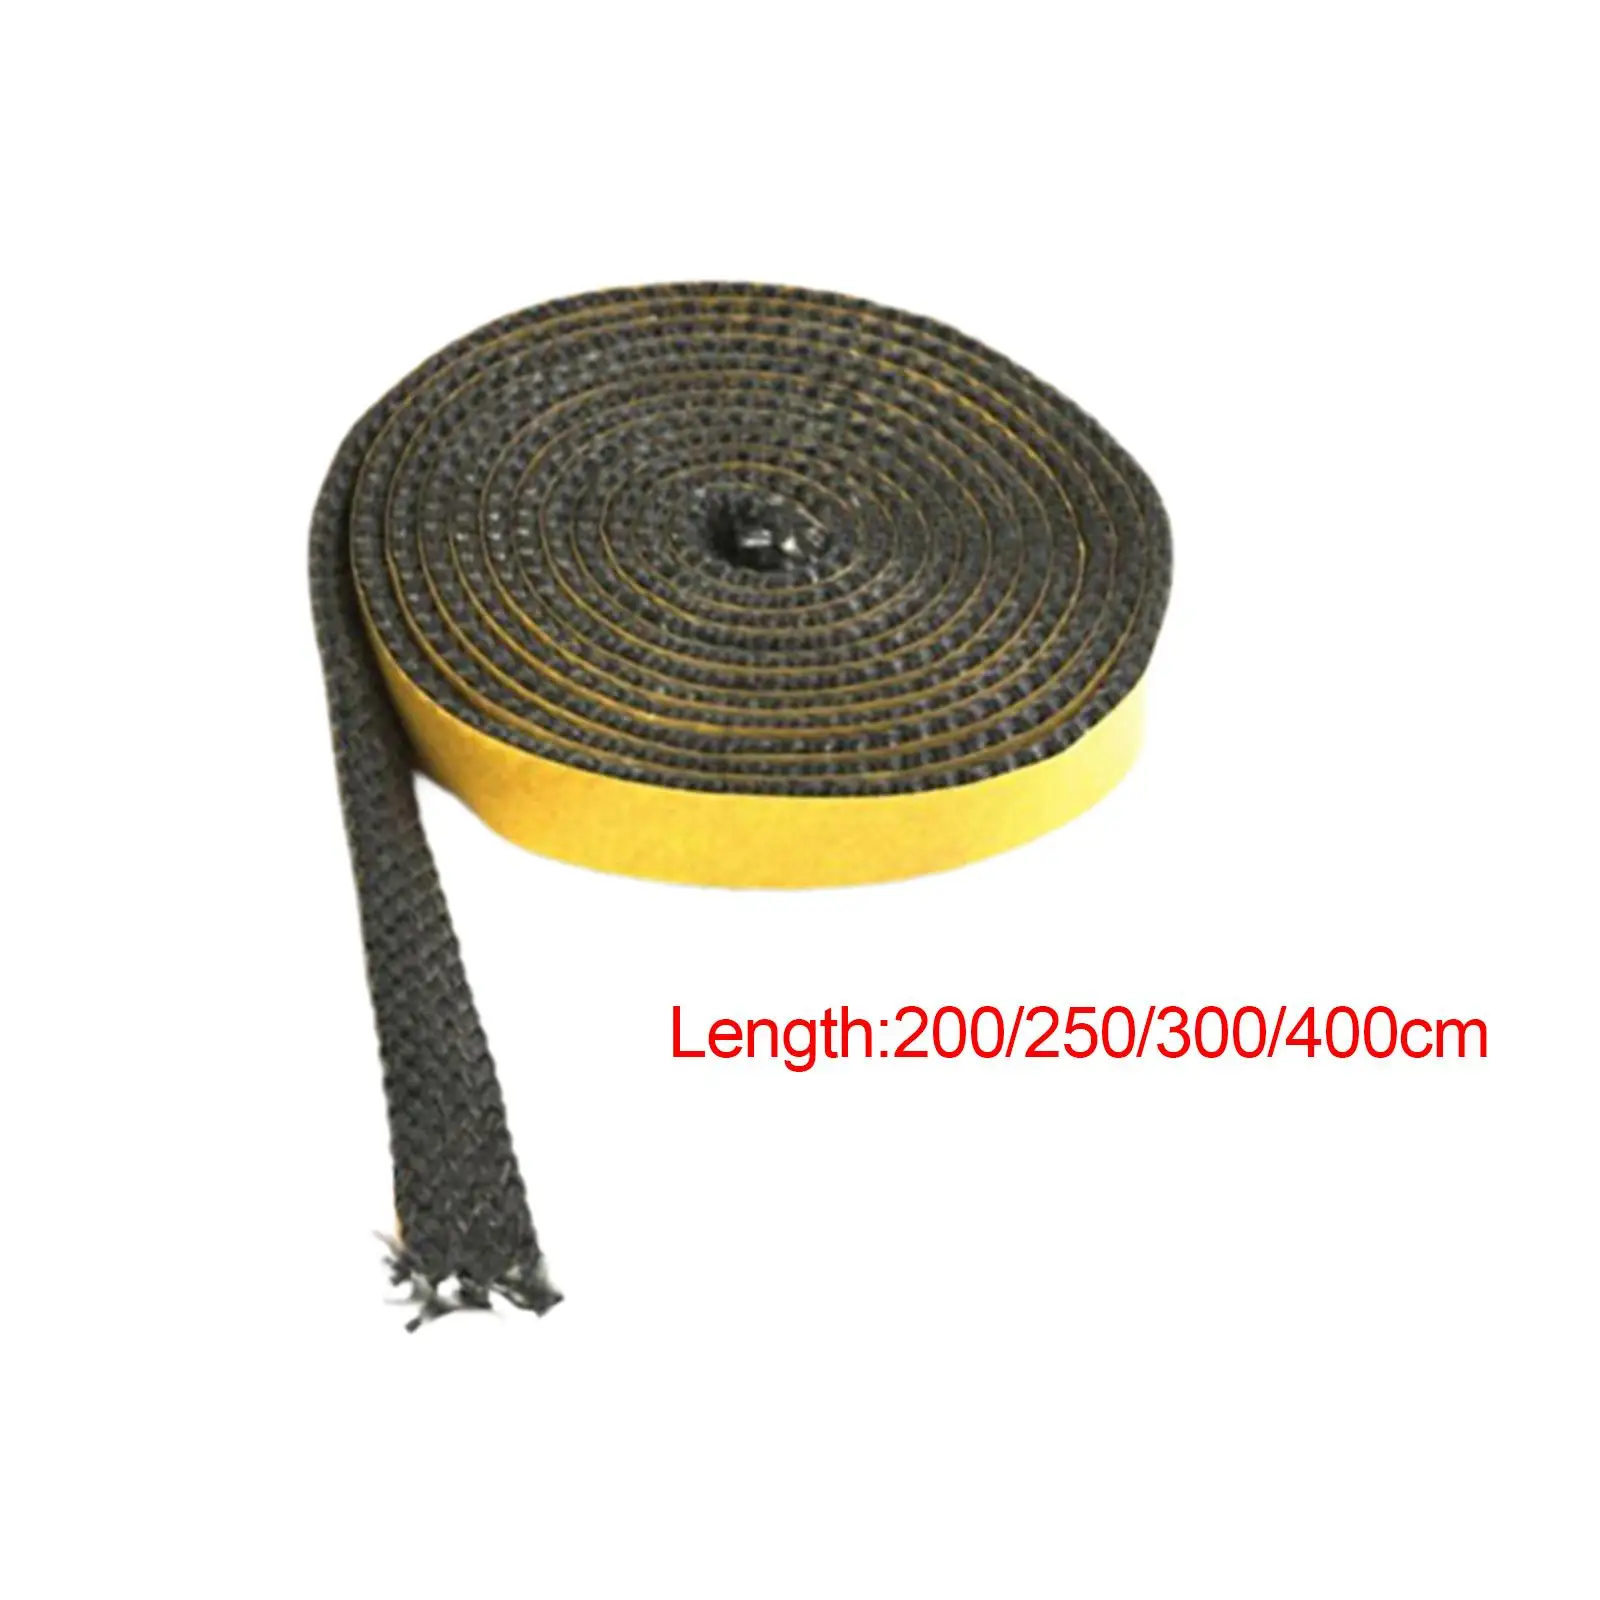 Stoves Gasket Fiberglass Flat Gasket Tape Multipurpose High Temperature Resistance Replace for Oven Stoves Door Window Fireplace